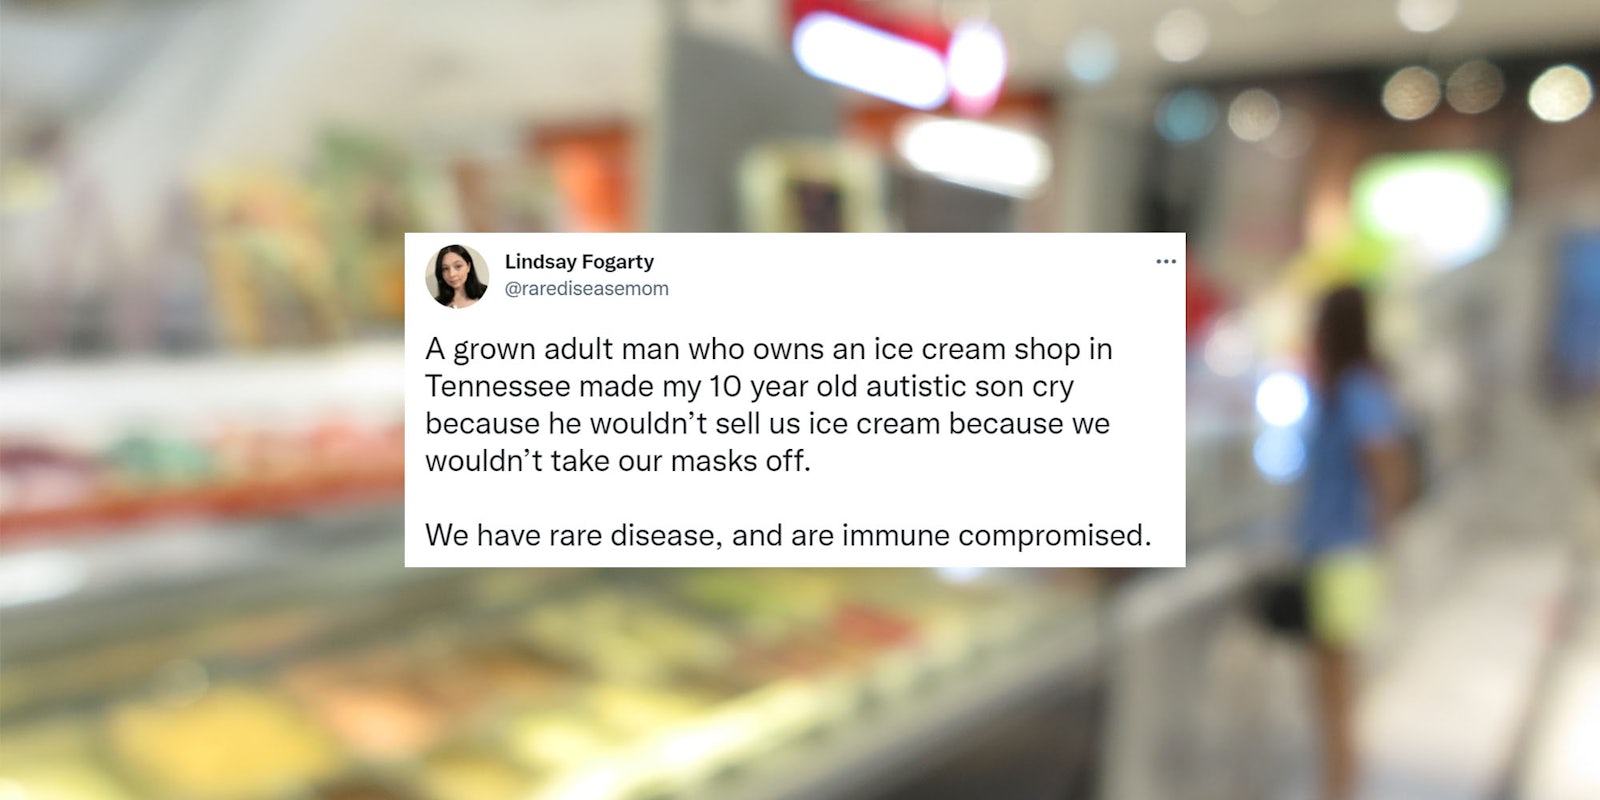 Ice-cream shop blurred background tweet by Lindsay Fogarty 'A grown adult man who owns an ice cream shop in Tennessee made my 10 year old autistic son cry because he wouldn't sell us ice cream because we wouldn't take our masks off. We have a rare disease, and our immune compromised.'